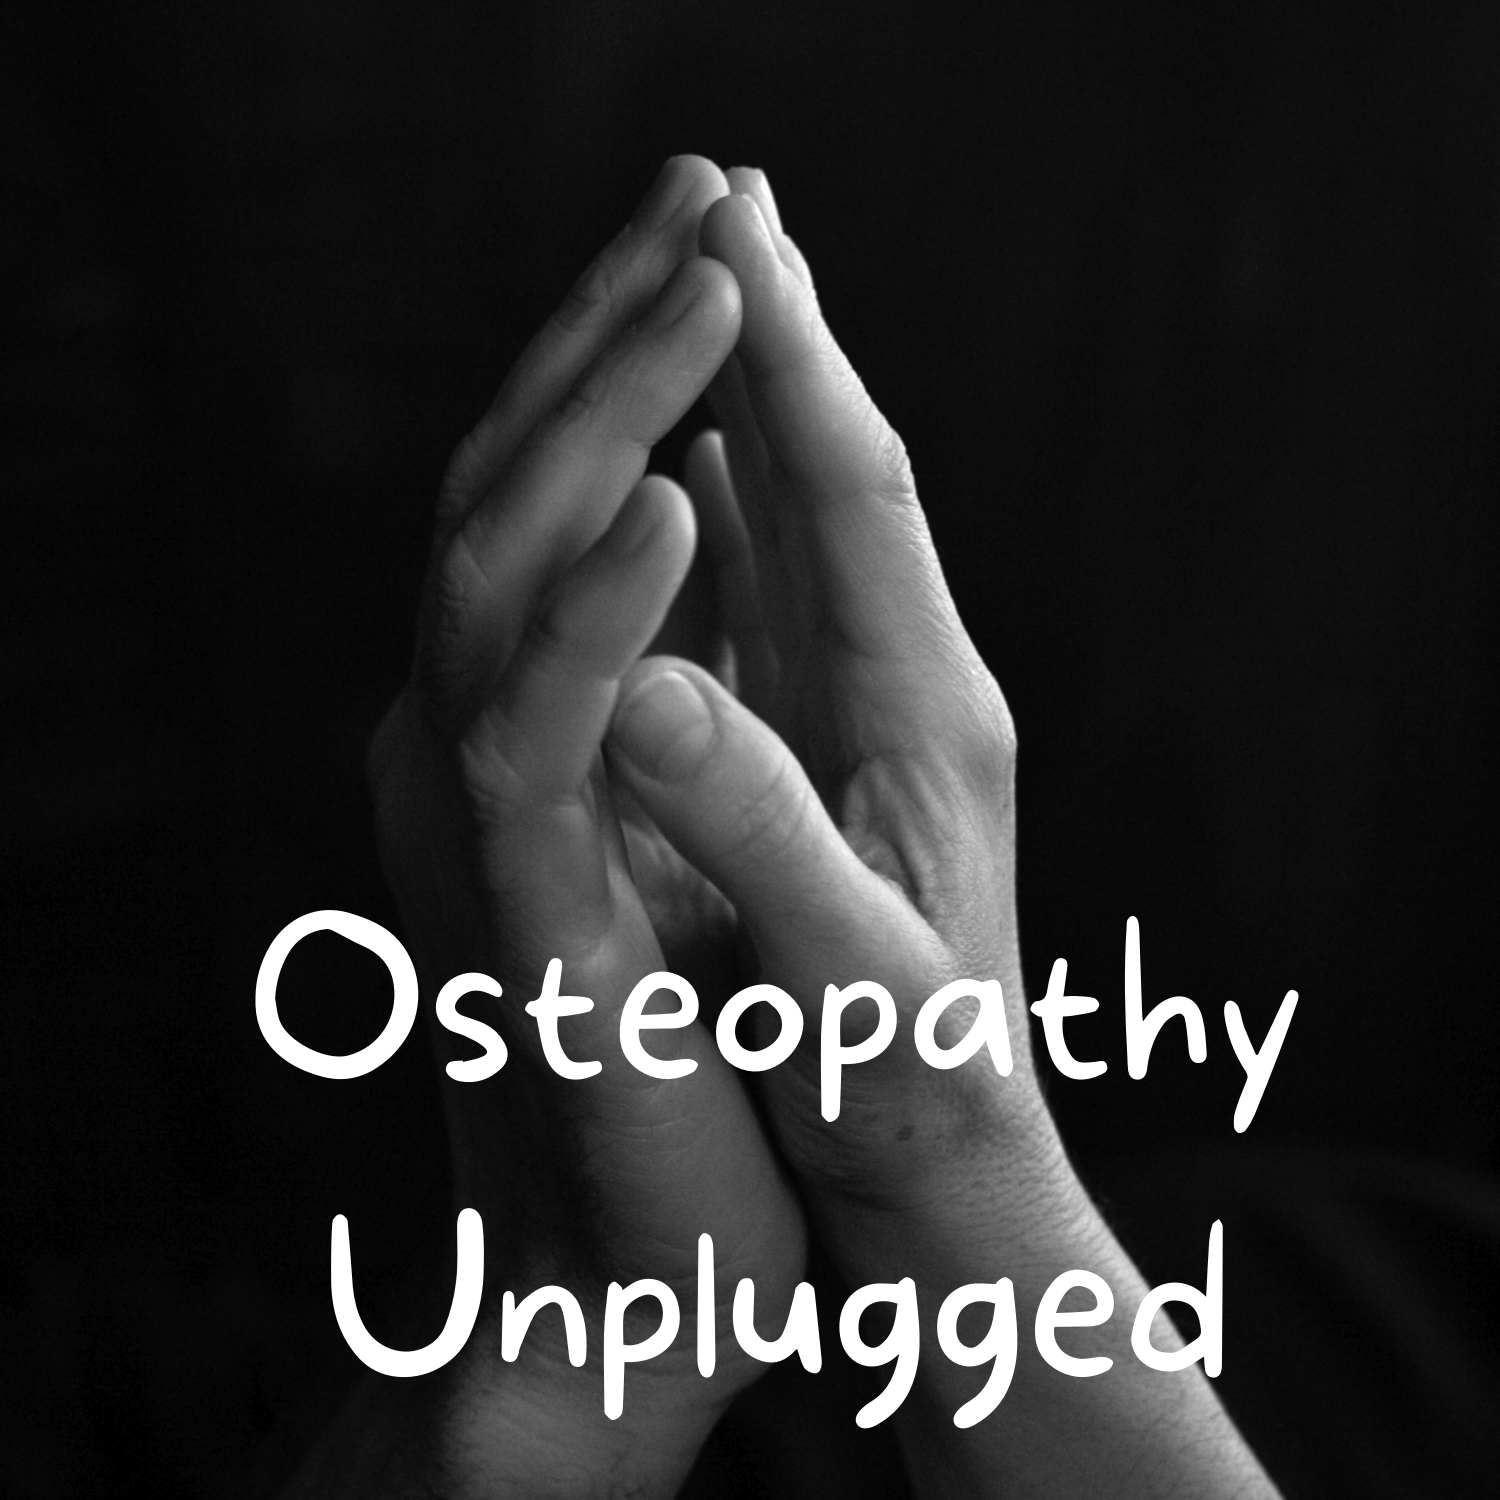 Episode 5 - Osteopathic Ways of Being